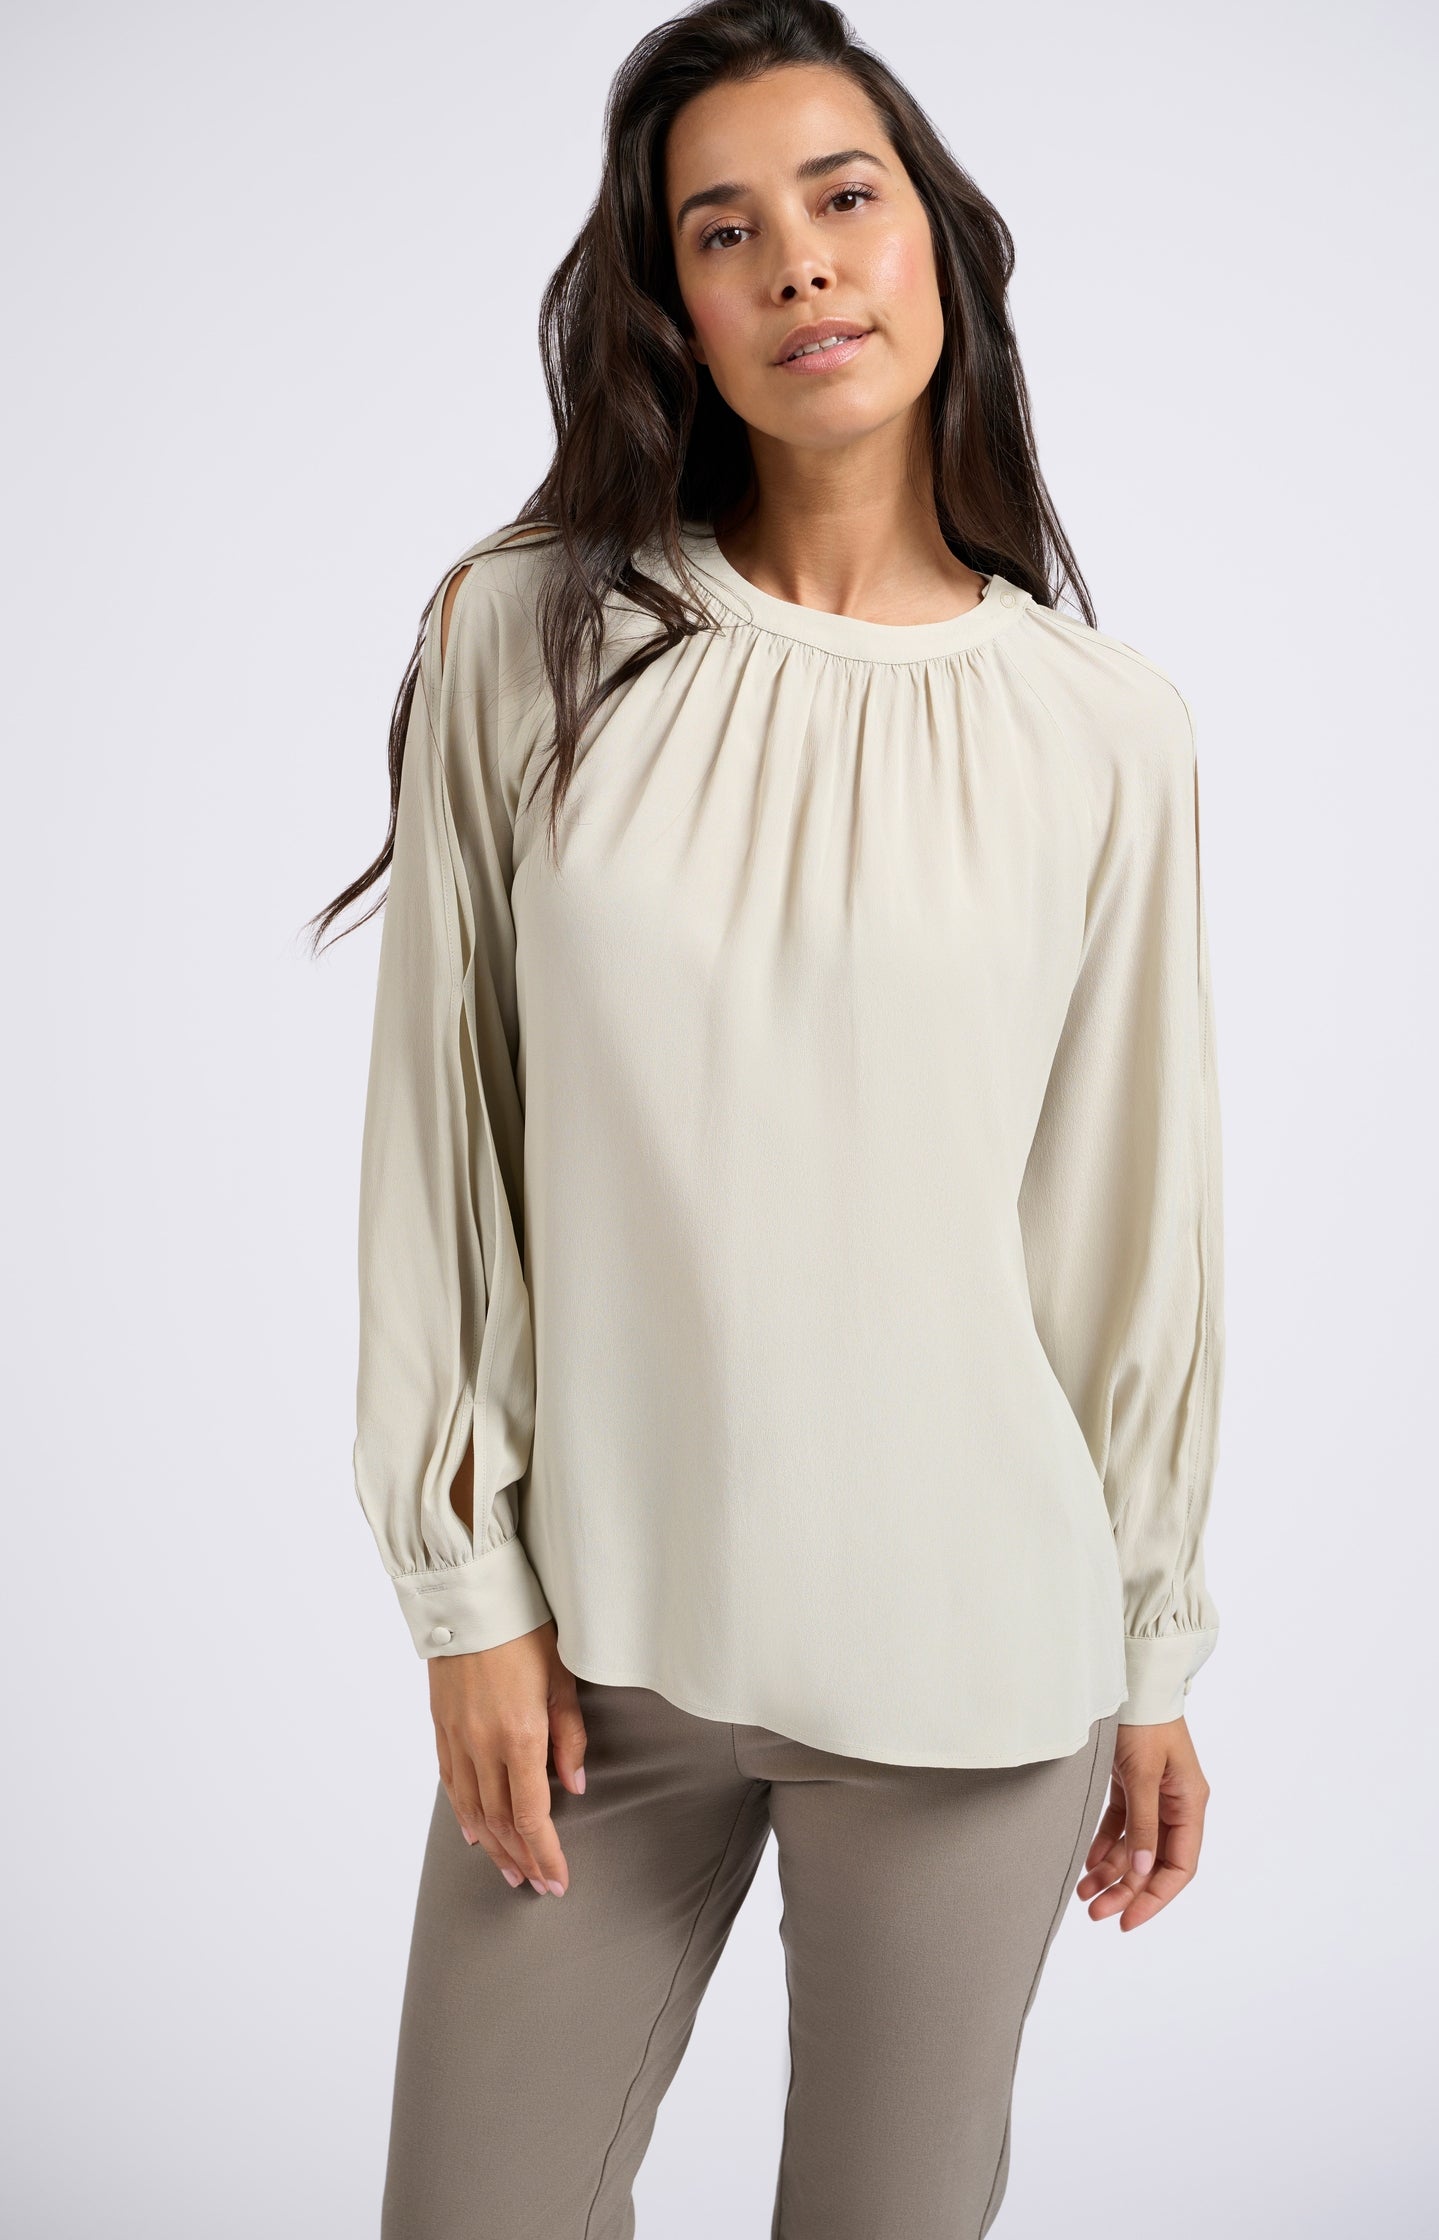 Woven top with long balloon sleeves - Type: lookbook